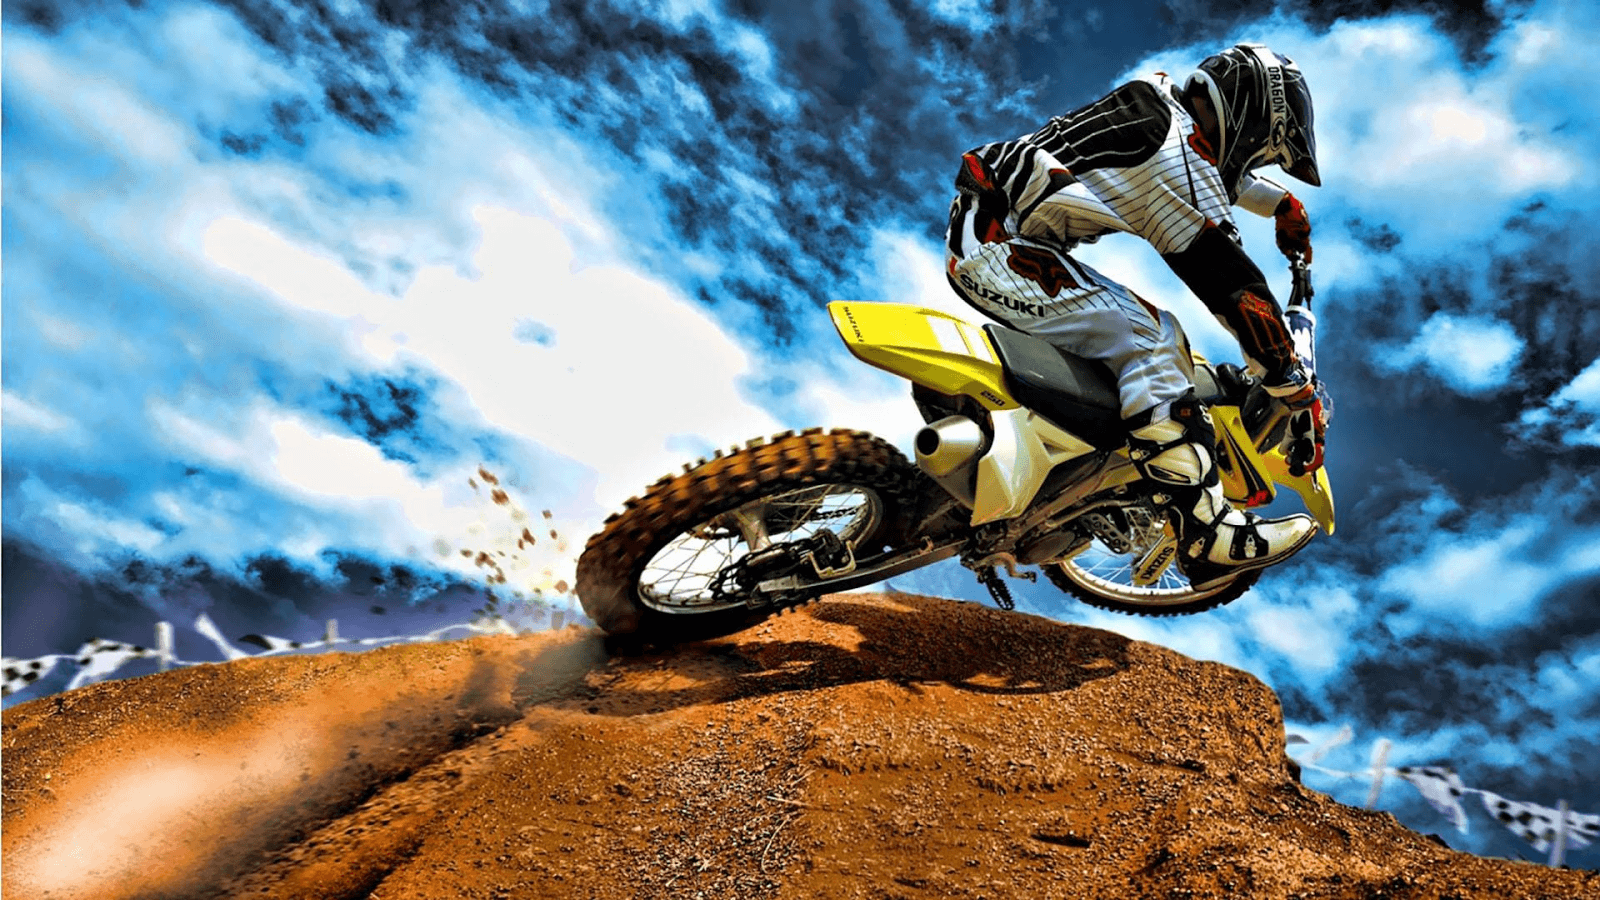 Extreme Motocross Wallpaper Apps on Google Play